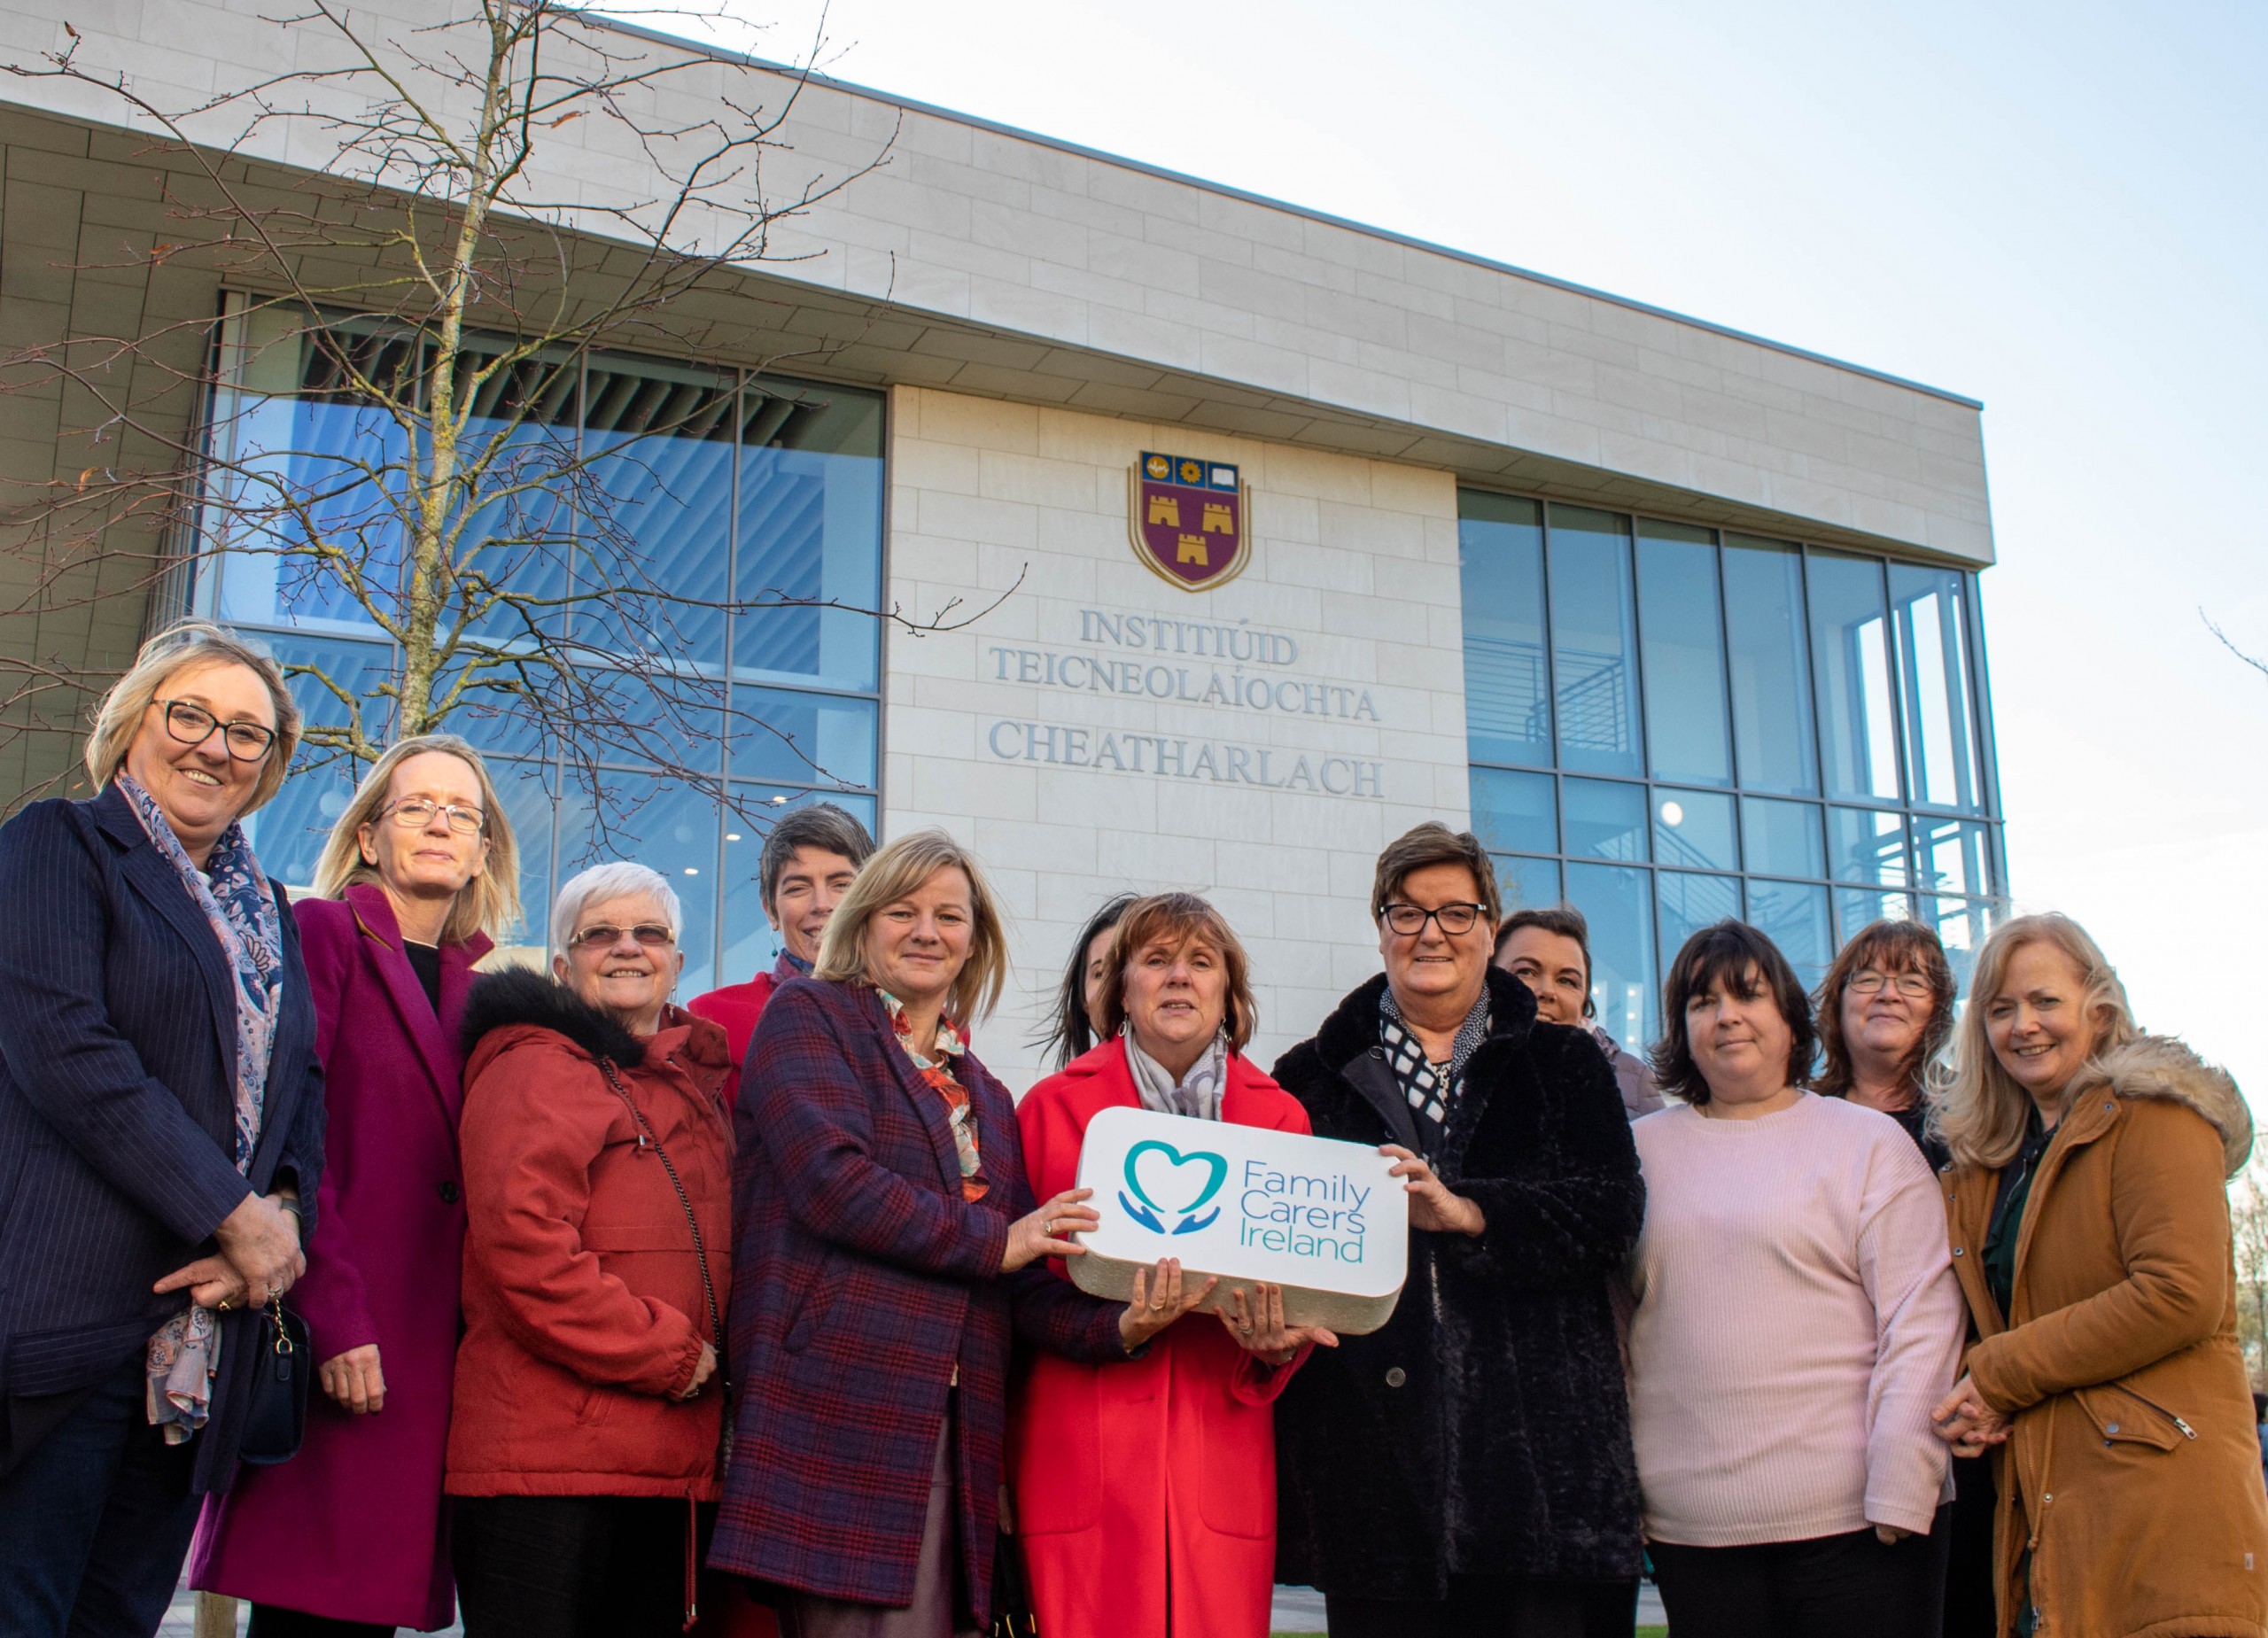 A group photo in front of an IT Carlow campus building with aa group of people holding a sign with the Family Carers Ireland Logo.